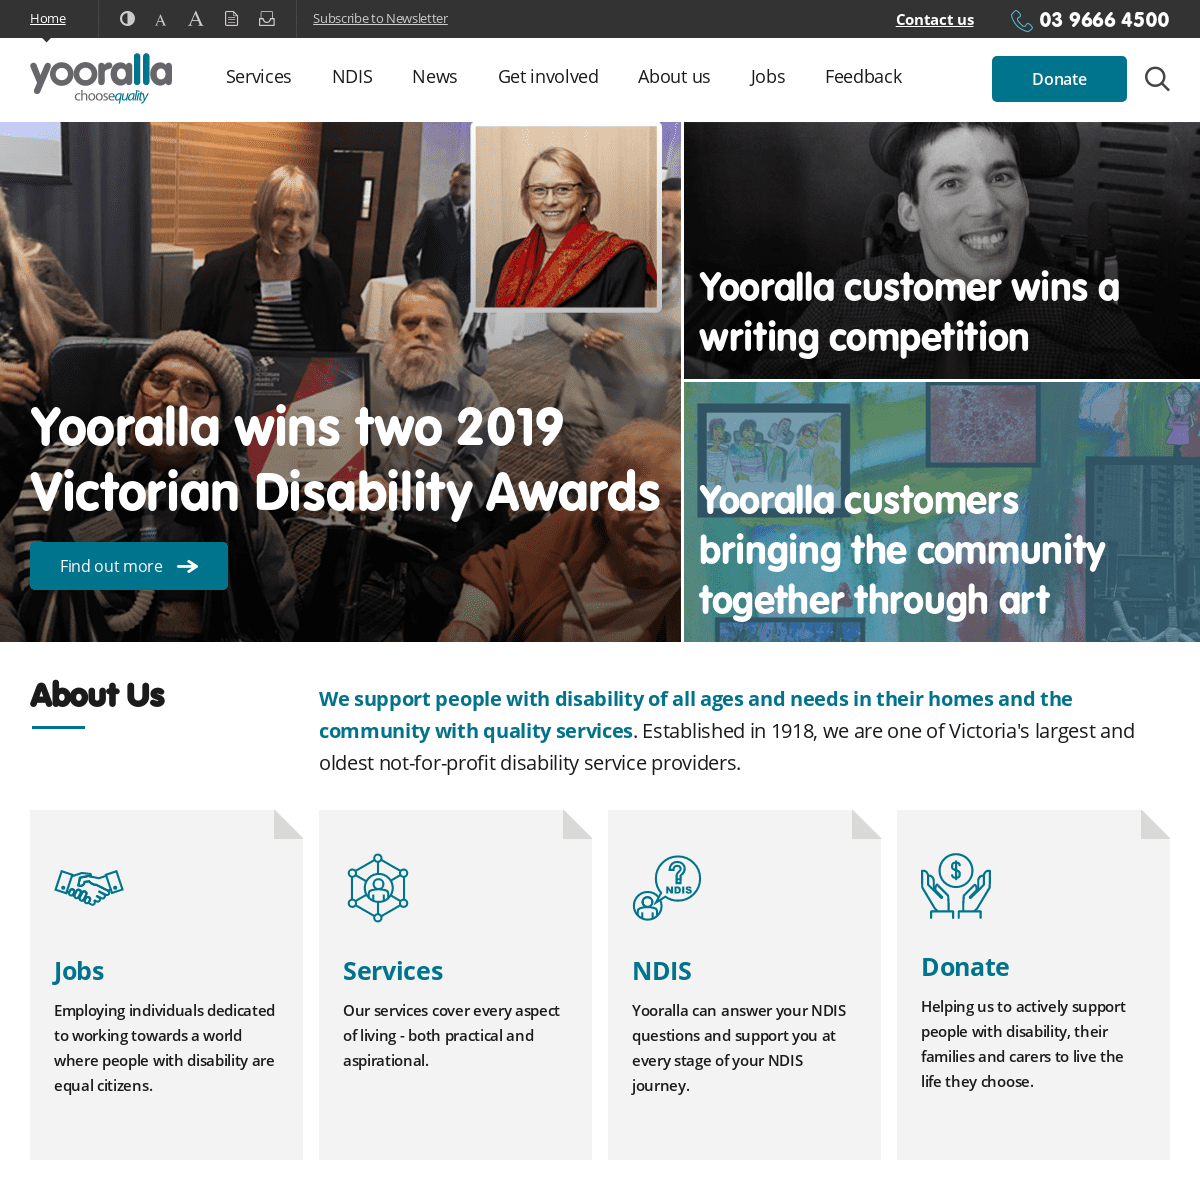 A complete backup of yooralla.com.au